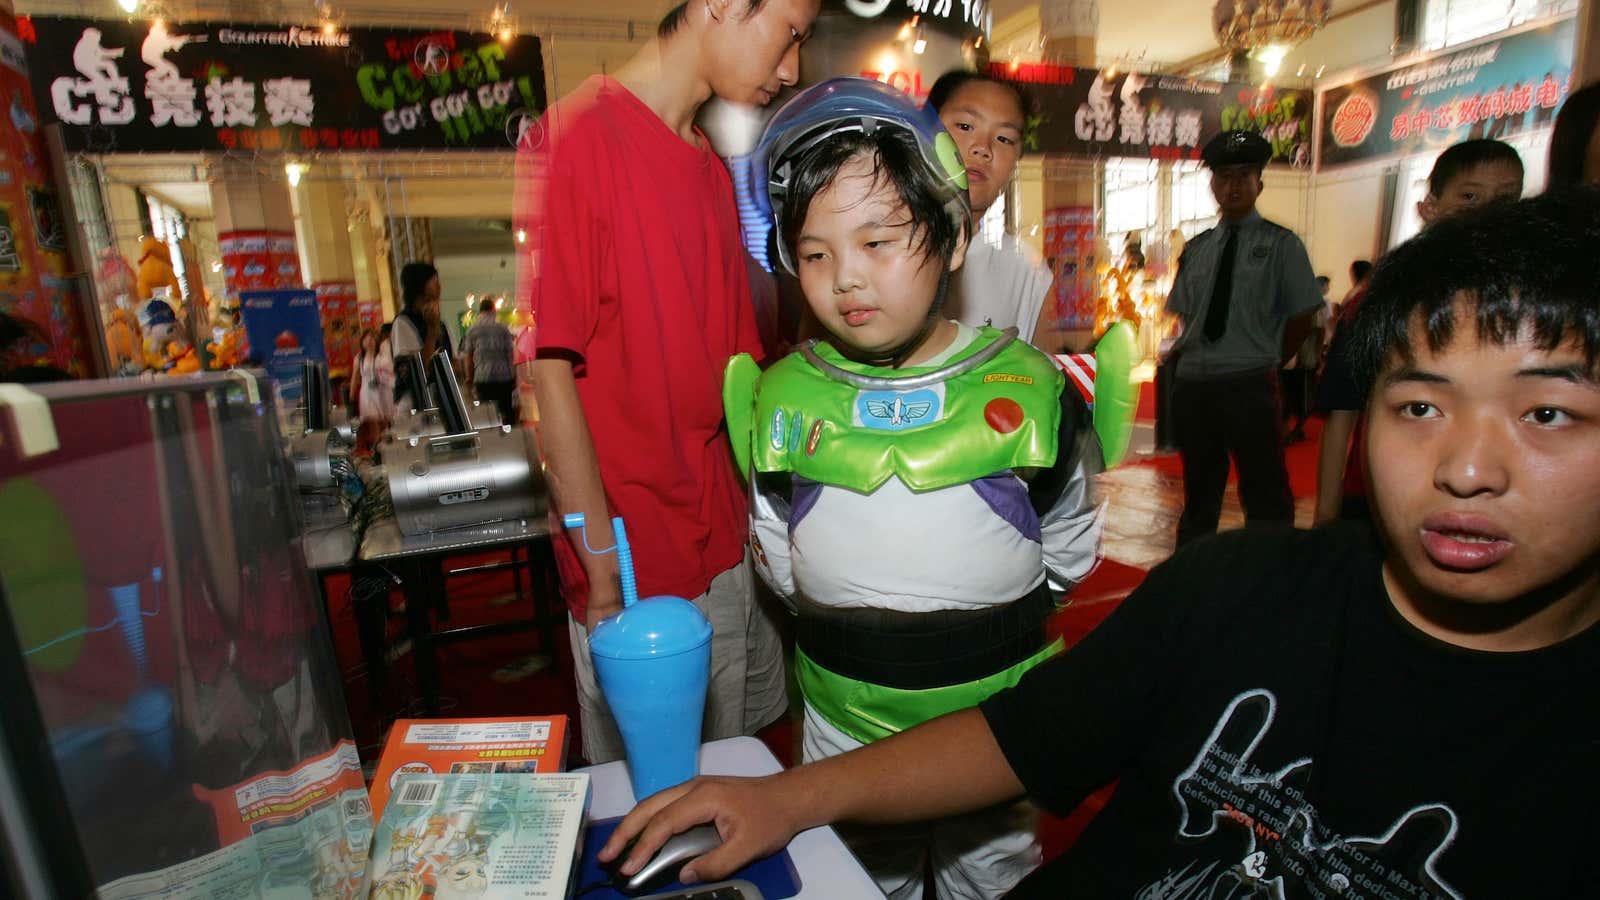 Don’t let the Buzz Lightyear costume fool you. The Chinese don’t really like Western console games.